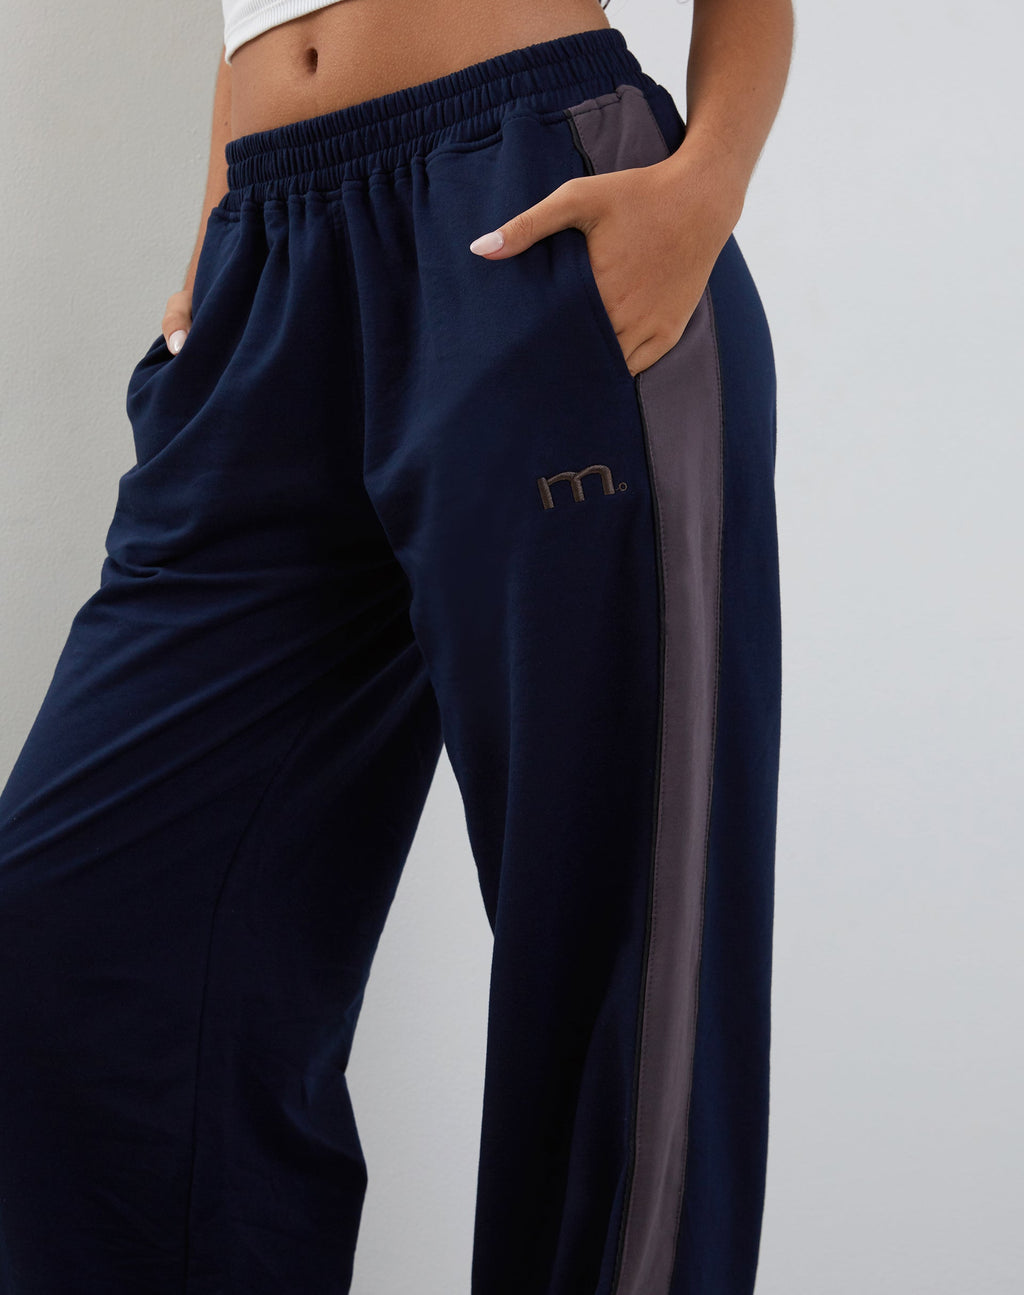 Bedion Oversized Jogger in Navy with M Embroidery